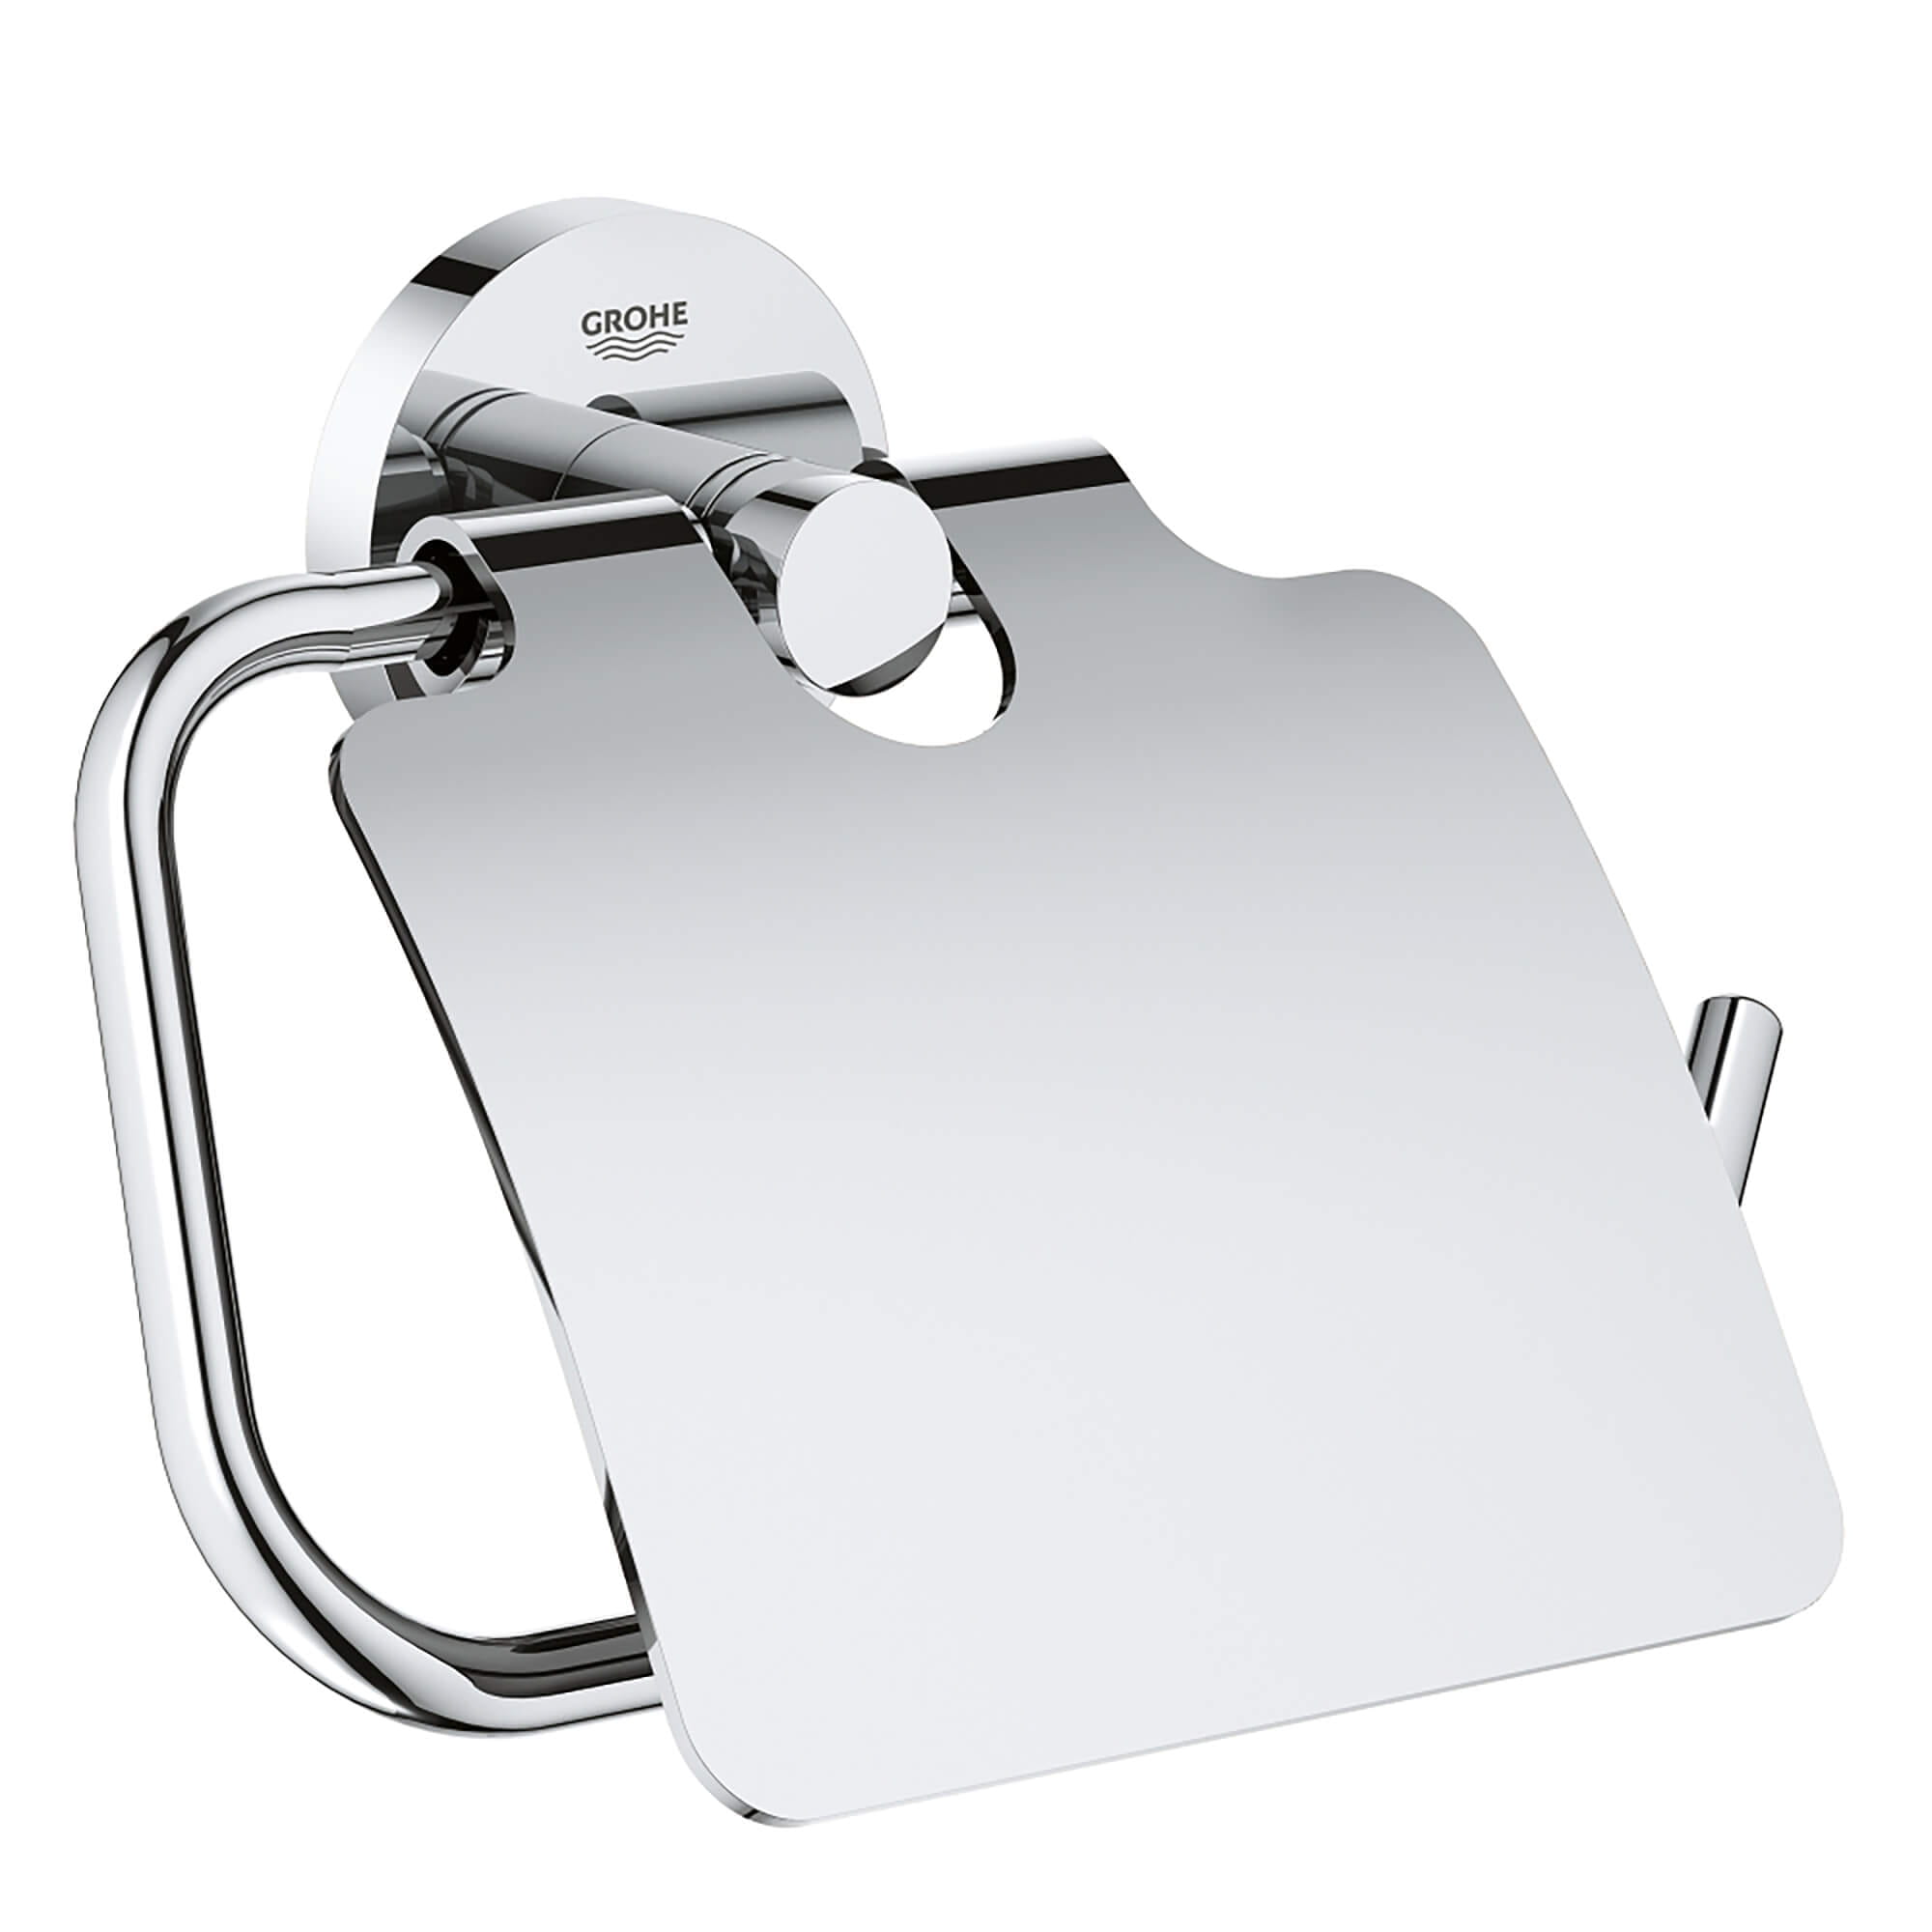 Toilet Paper Holder WCover GROHE CHROME